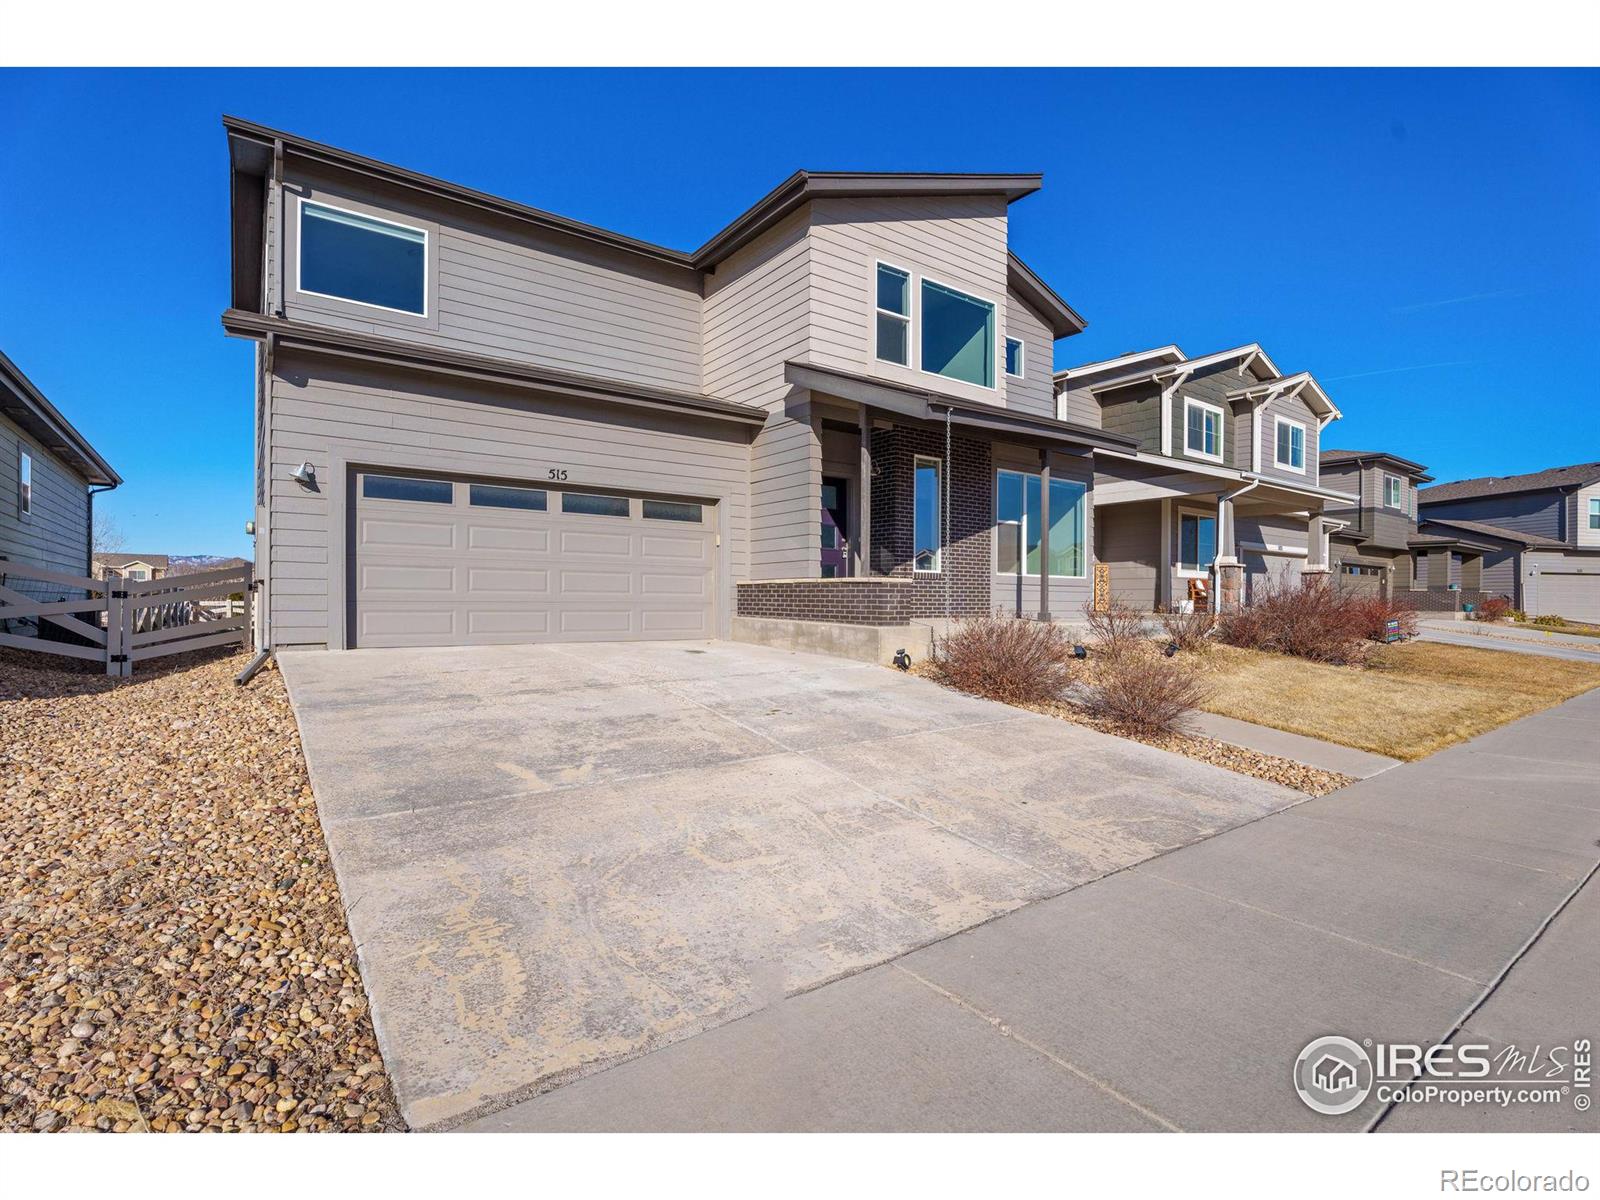 CMA Image for 515  Stout Street,Fort Collins, Colorado